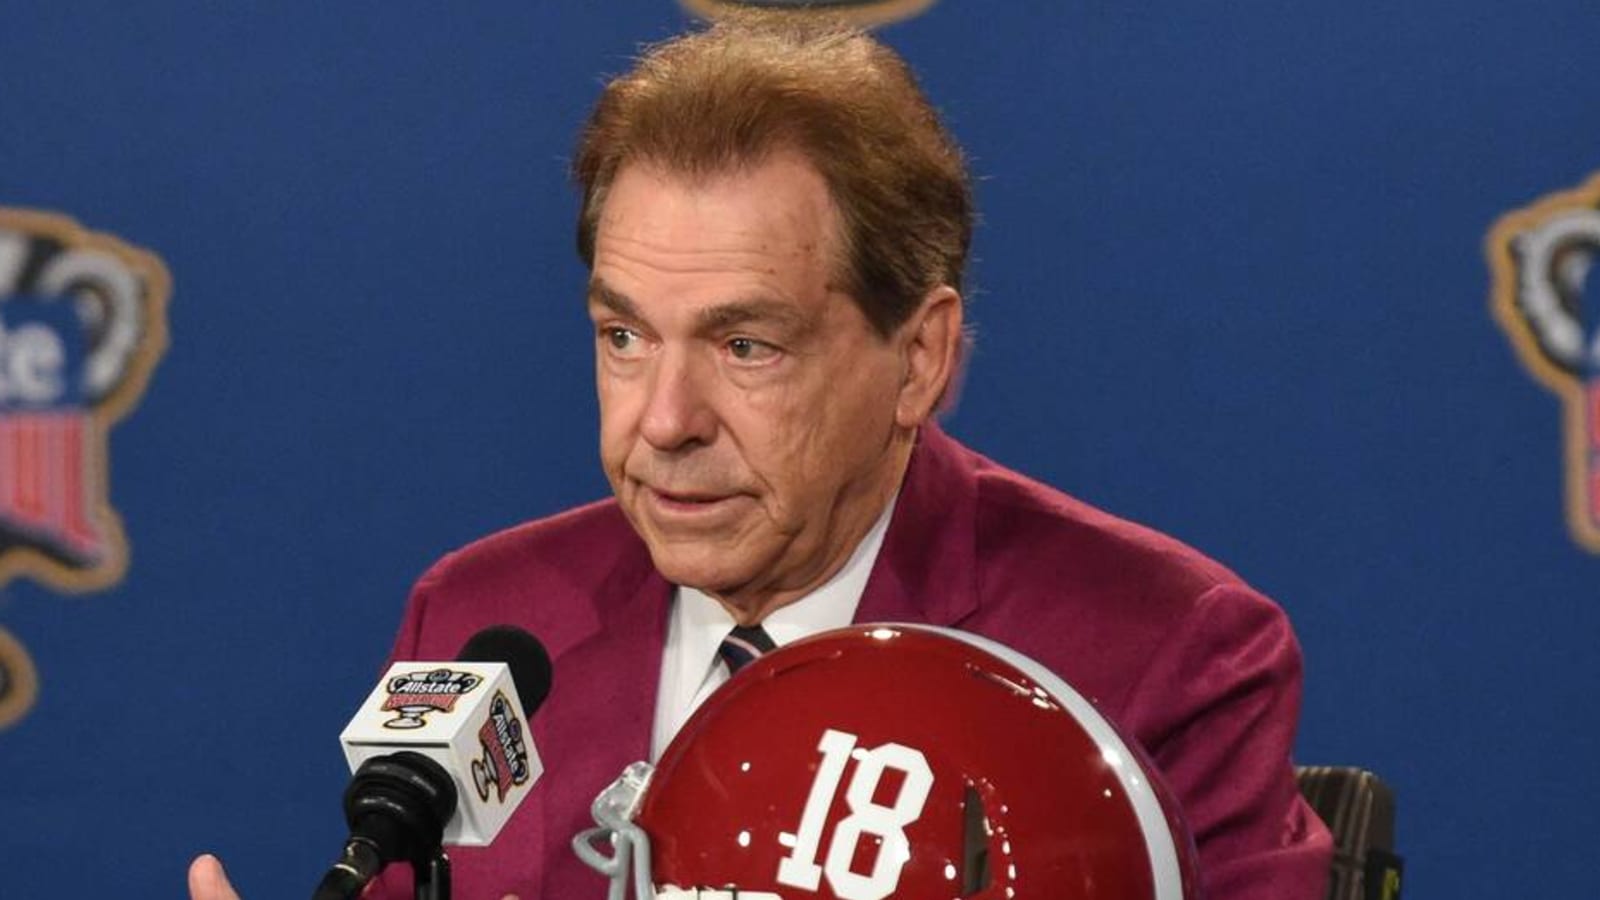 David Pollack’s comments in front of Nick Saban are going viral